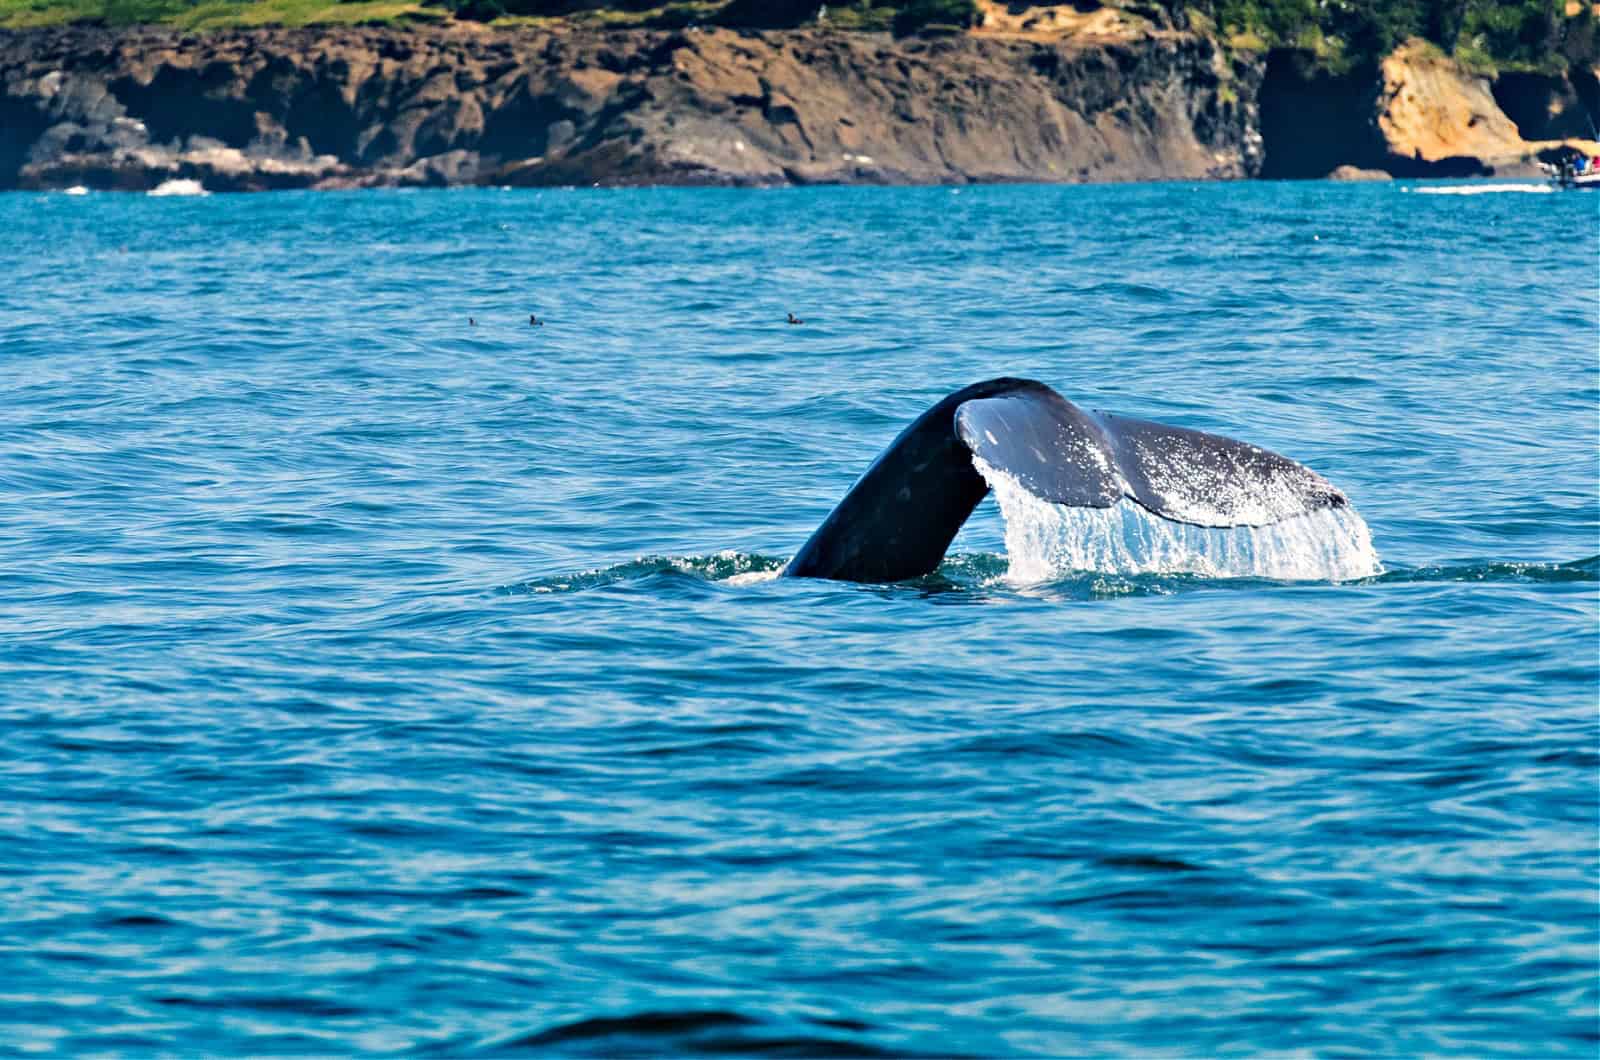 Water Drips off Whale Tail as it dives down for food